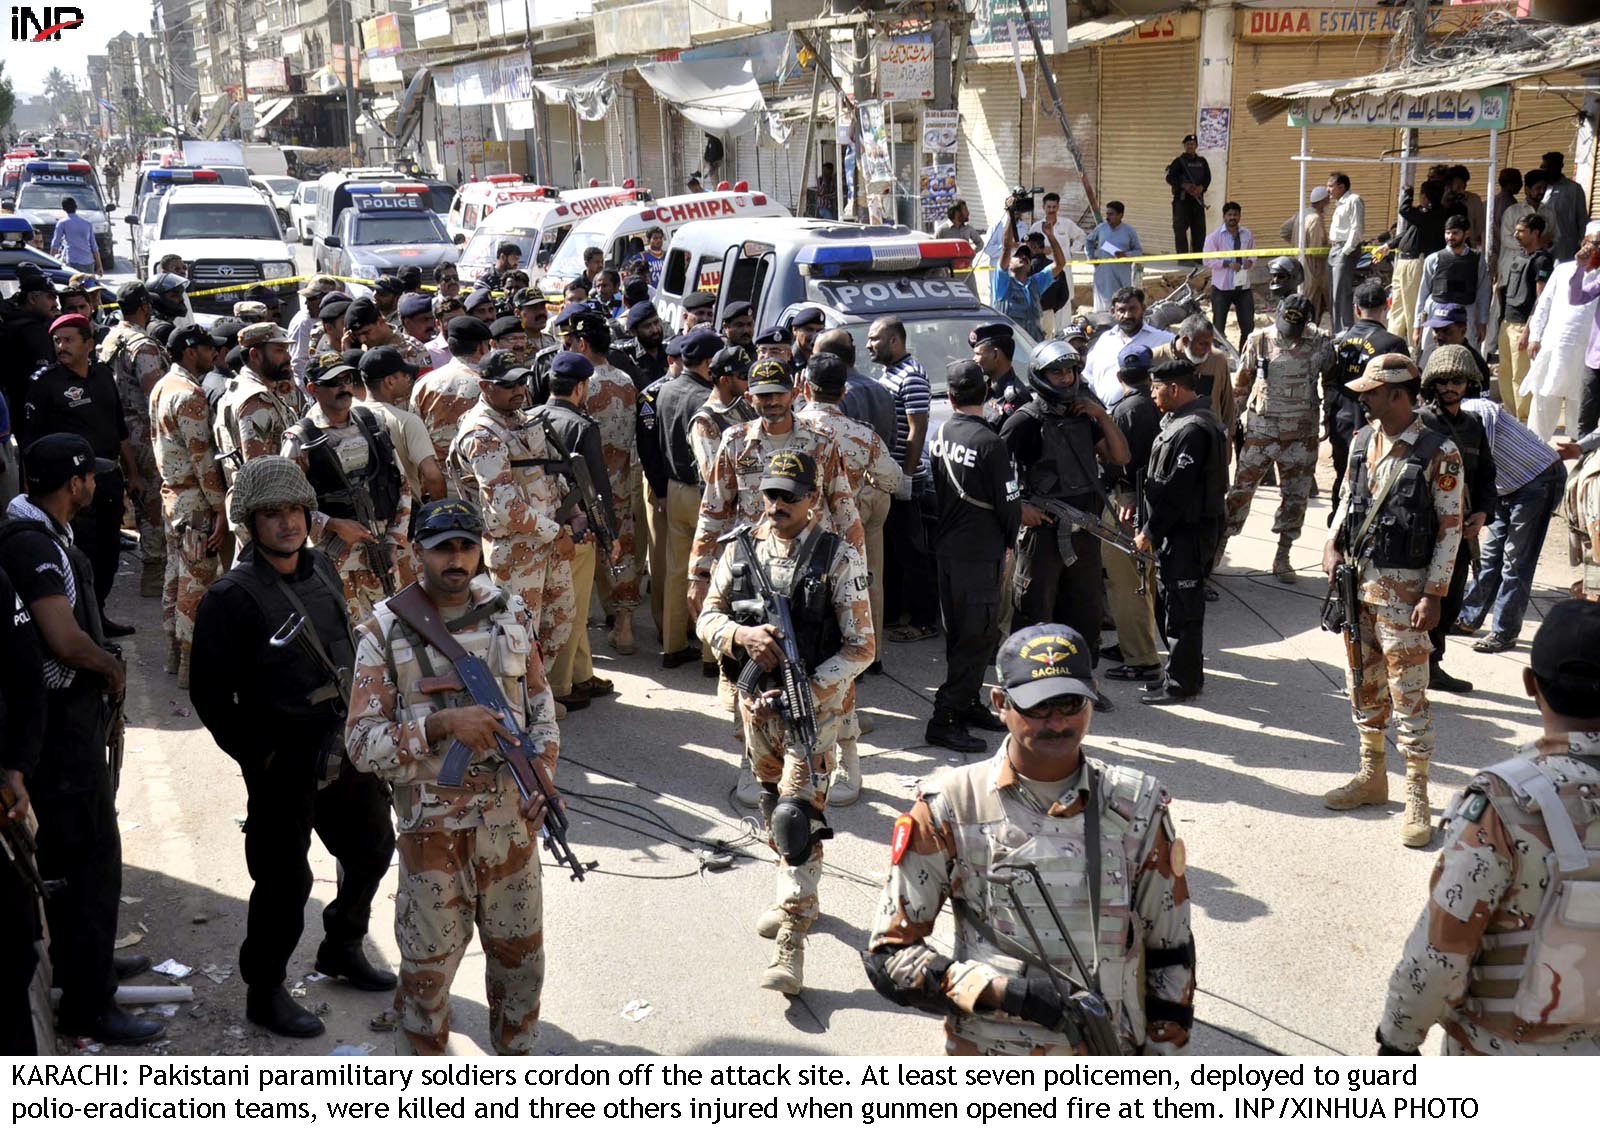 KARACHI: Pakistani paramilitary soldiers cordon off the attack site. At least seven policemen, deployed to guard polio-eradication teams, were killed and three others injured when gunmen opened fire at them. INP/XINHUA PHOTO